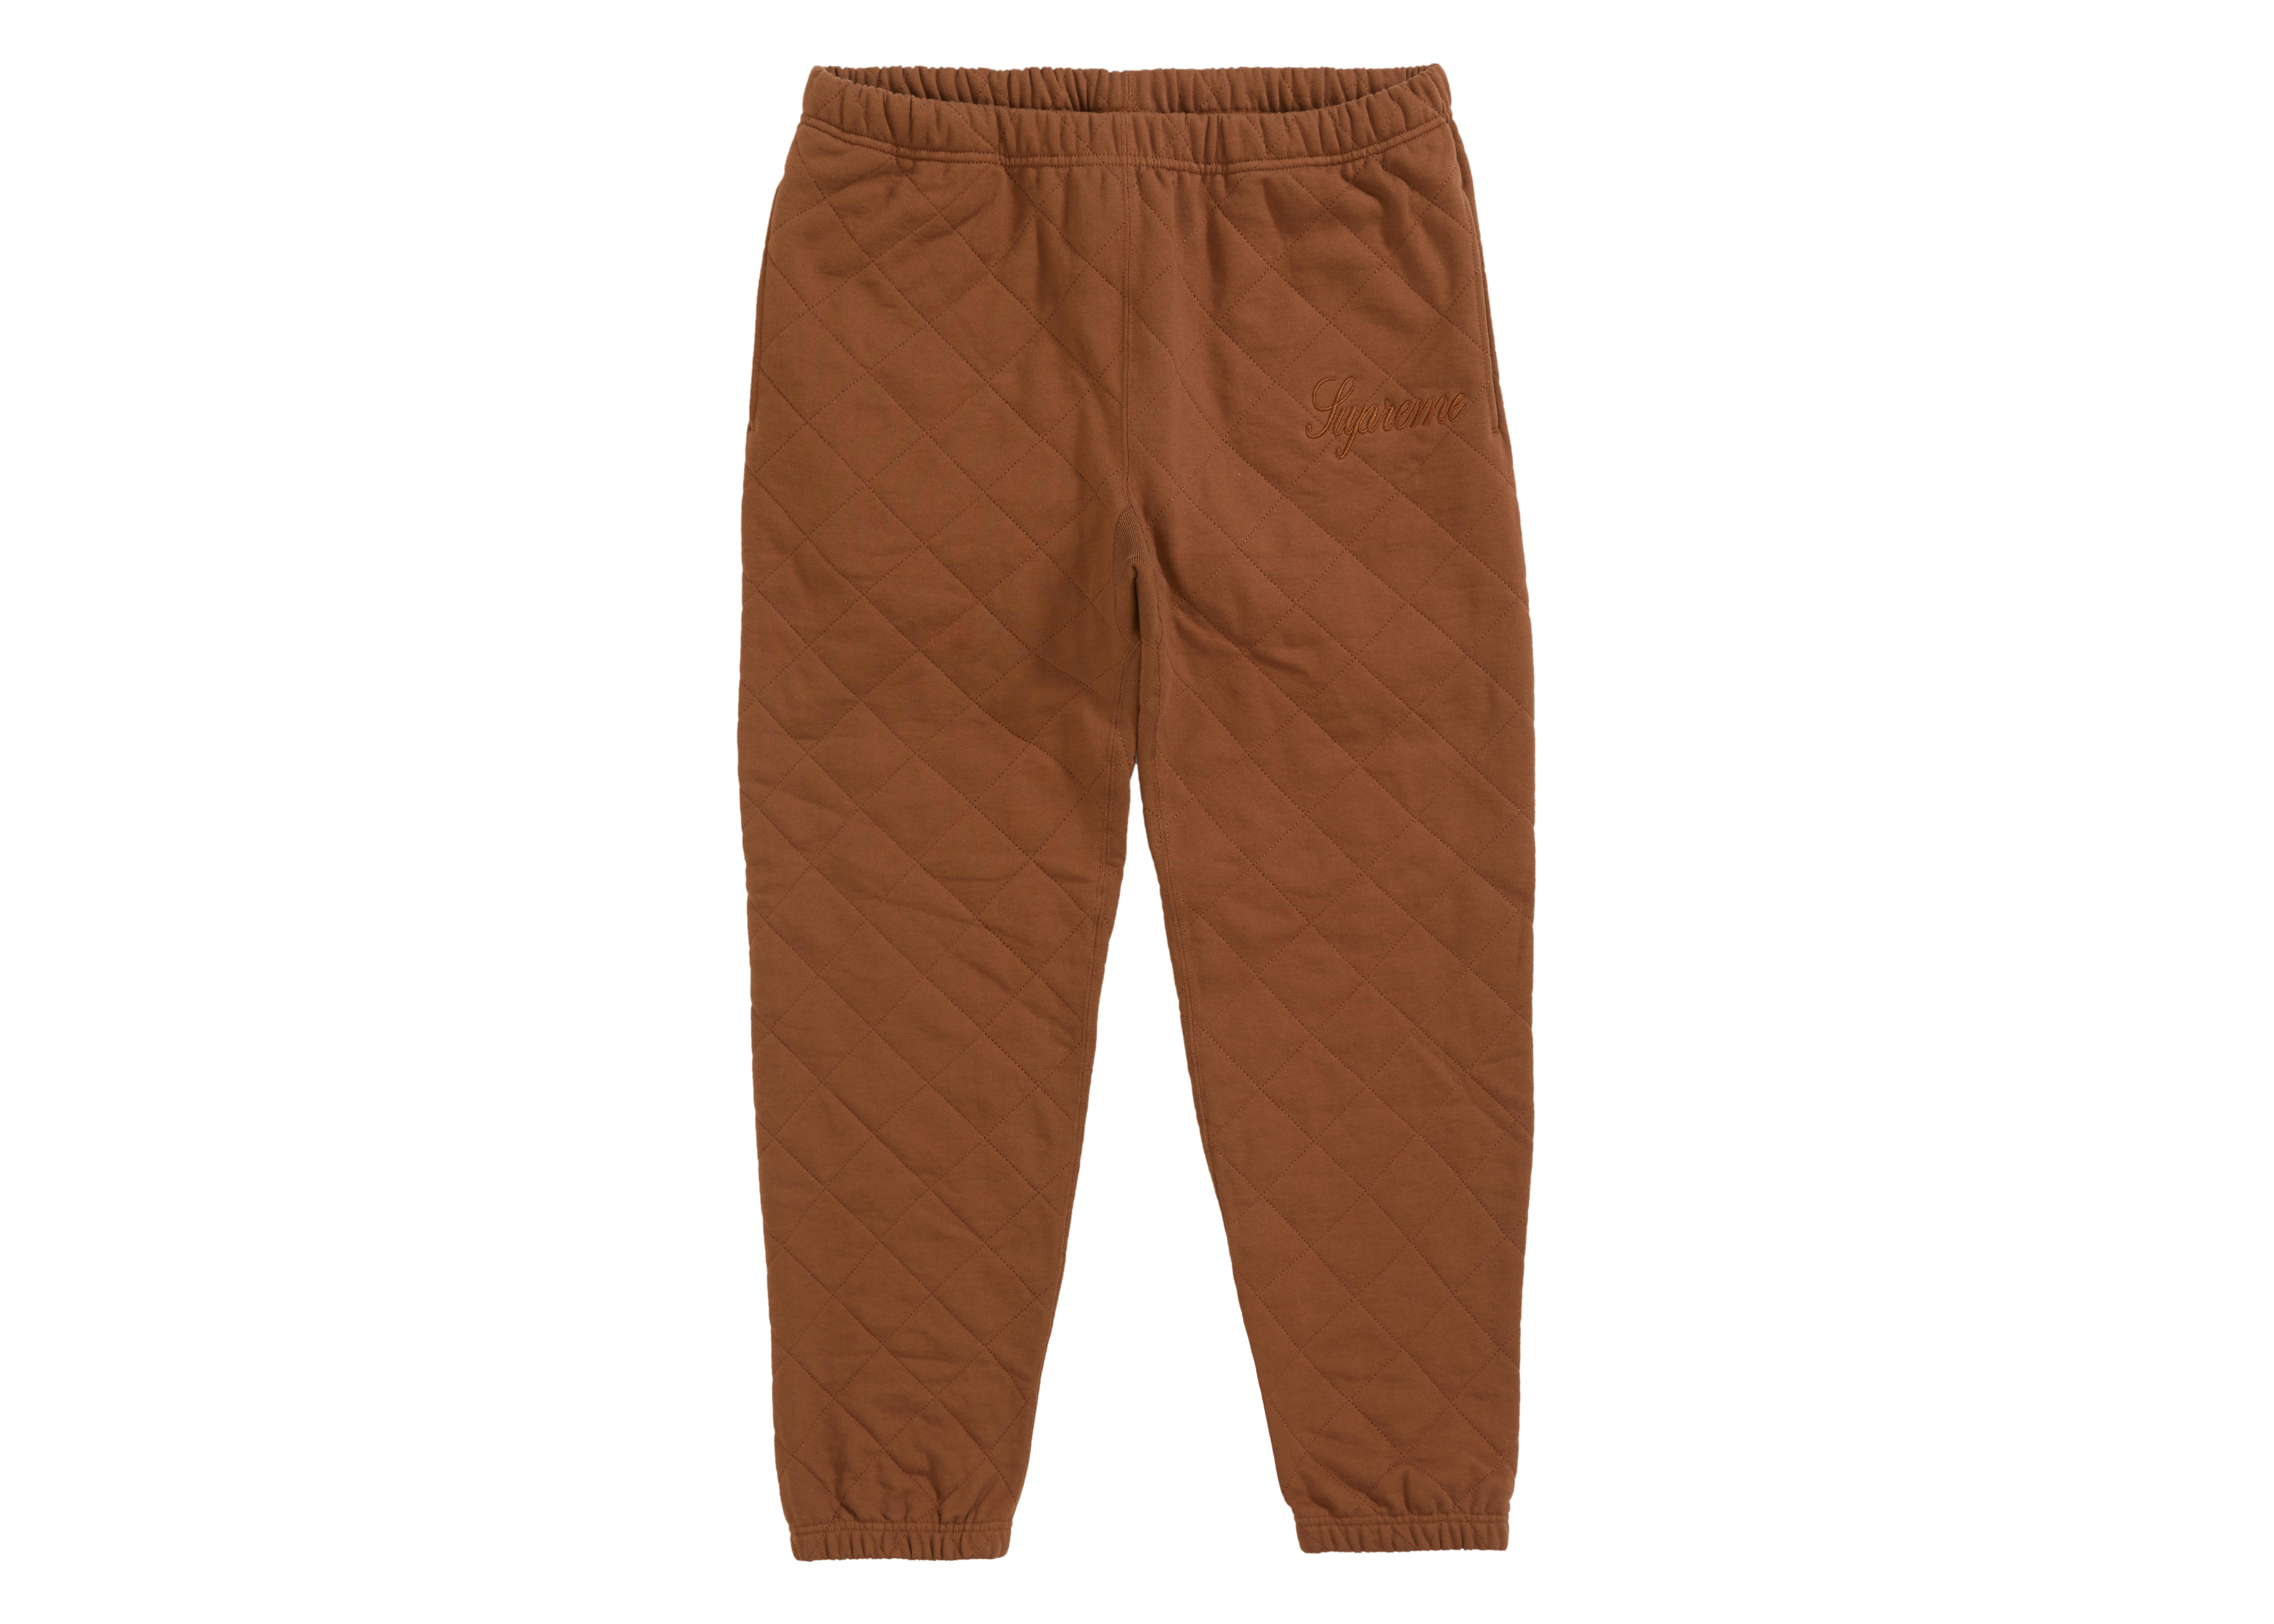 Supreme Quilted Sweatpant Brown - FW18 - US